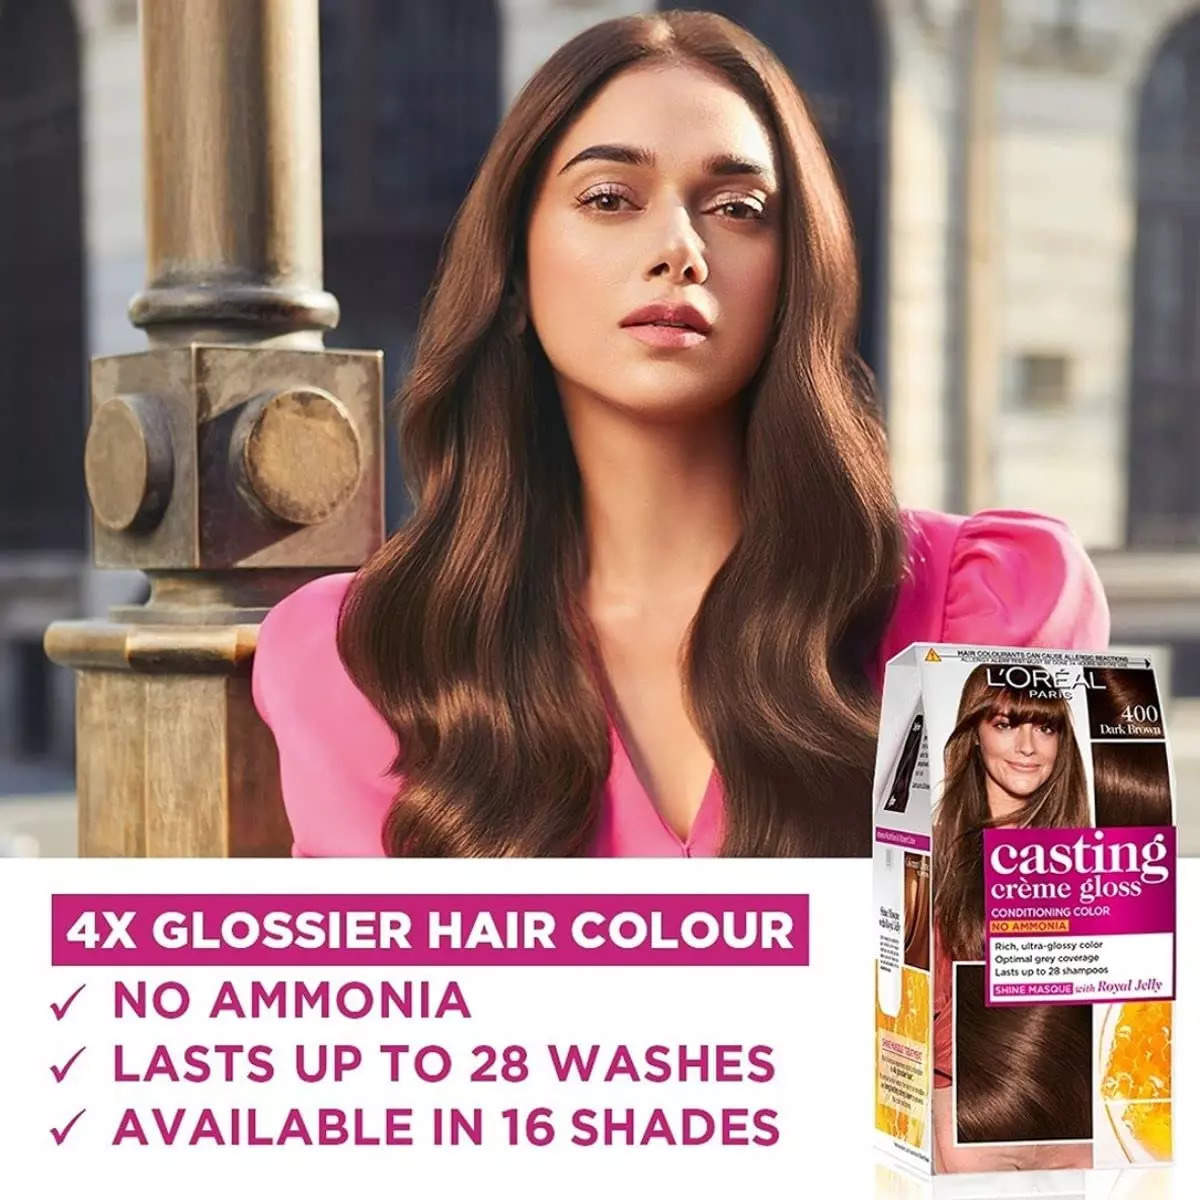 What are suitable hair color shades for indian skin tones